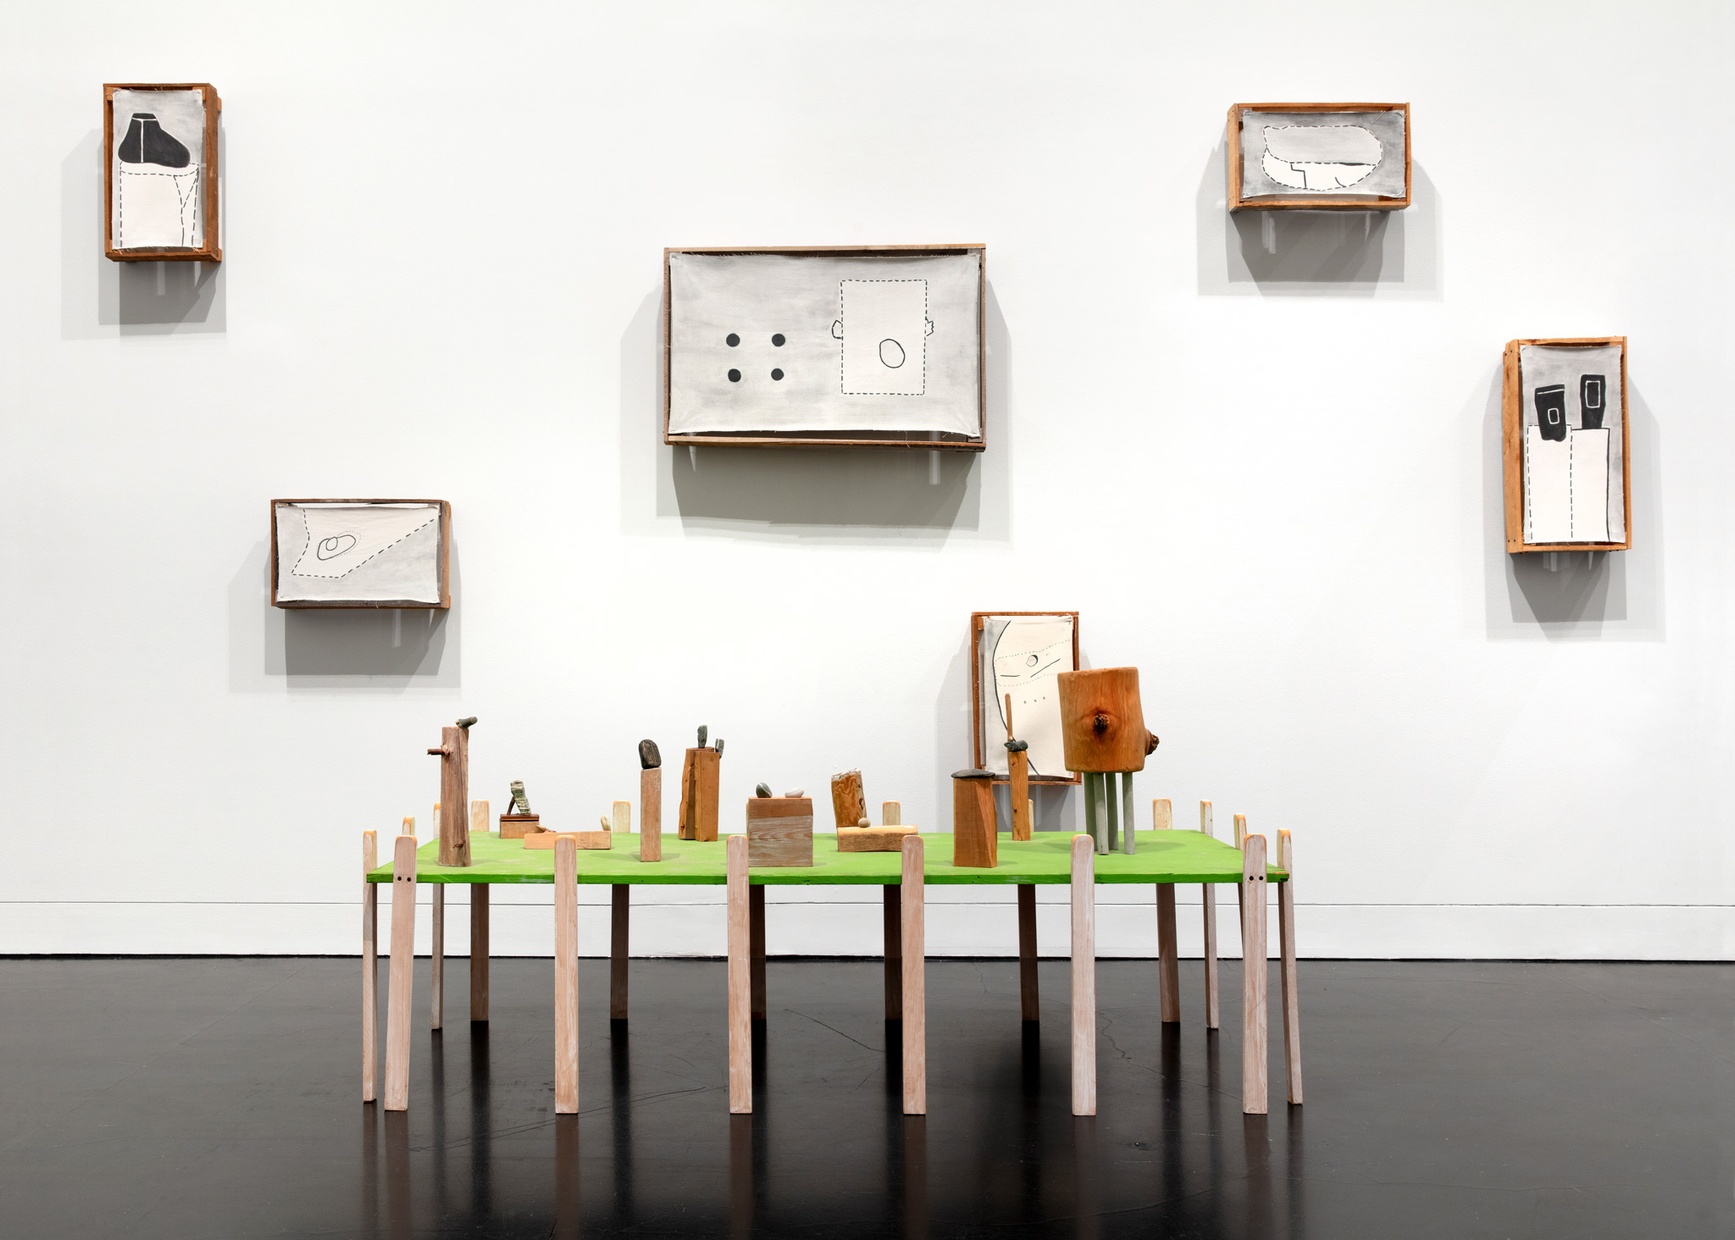 A sculptural artwork by artist Ree Morton which includes mounted parts as well as a green table-like structure with small pieces sitting on top. The artwork is made of acrylic paint on canvas mounted on wood, wood, acrylic paint, and stones